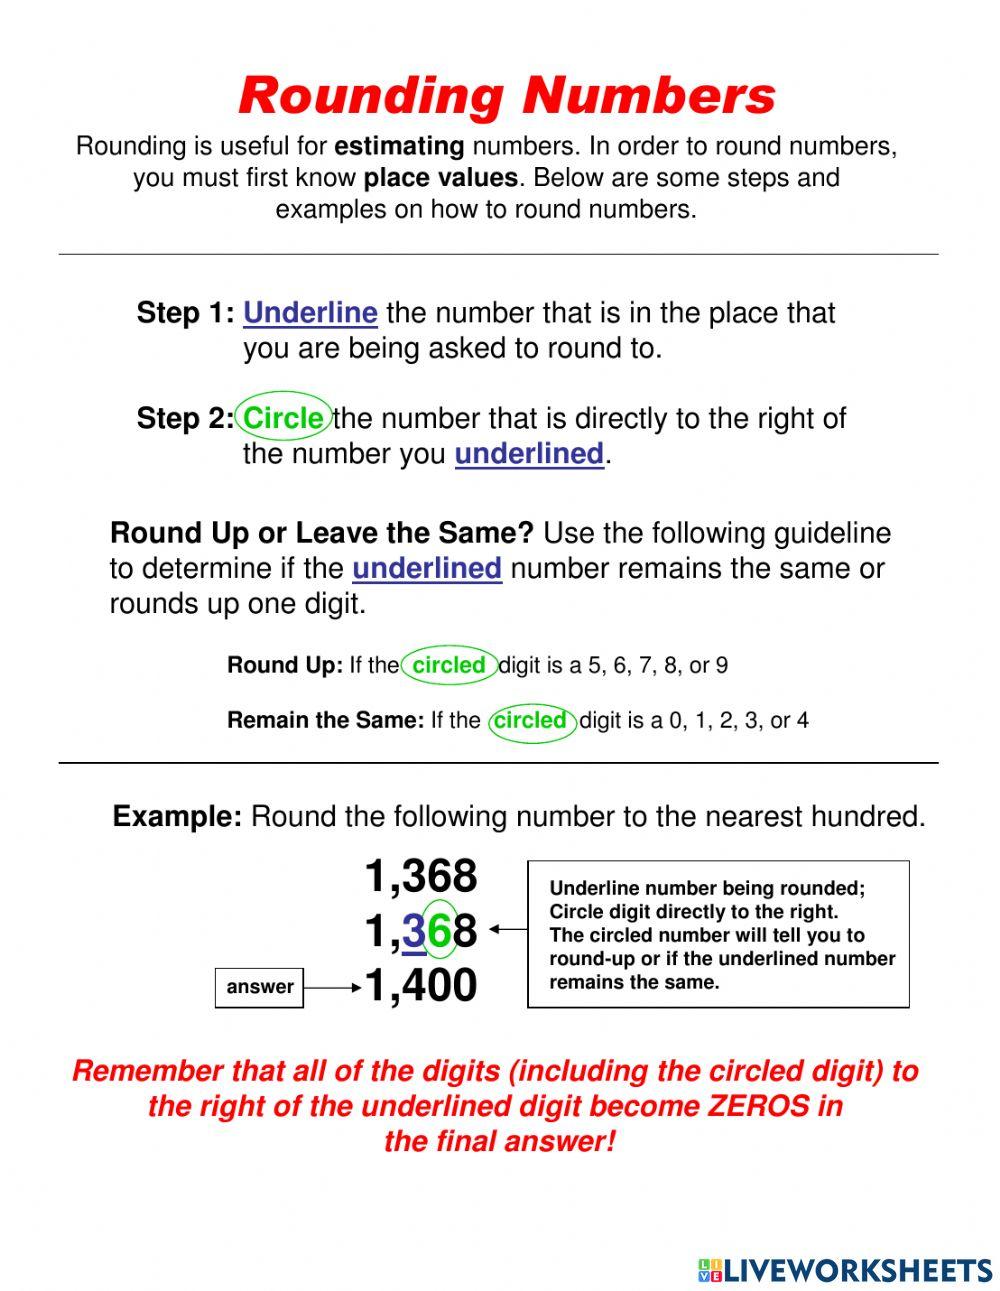 Rounding Numbers Steps